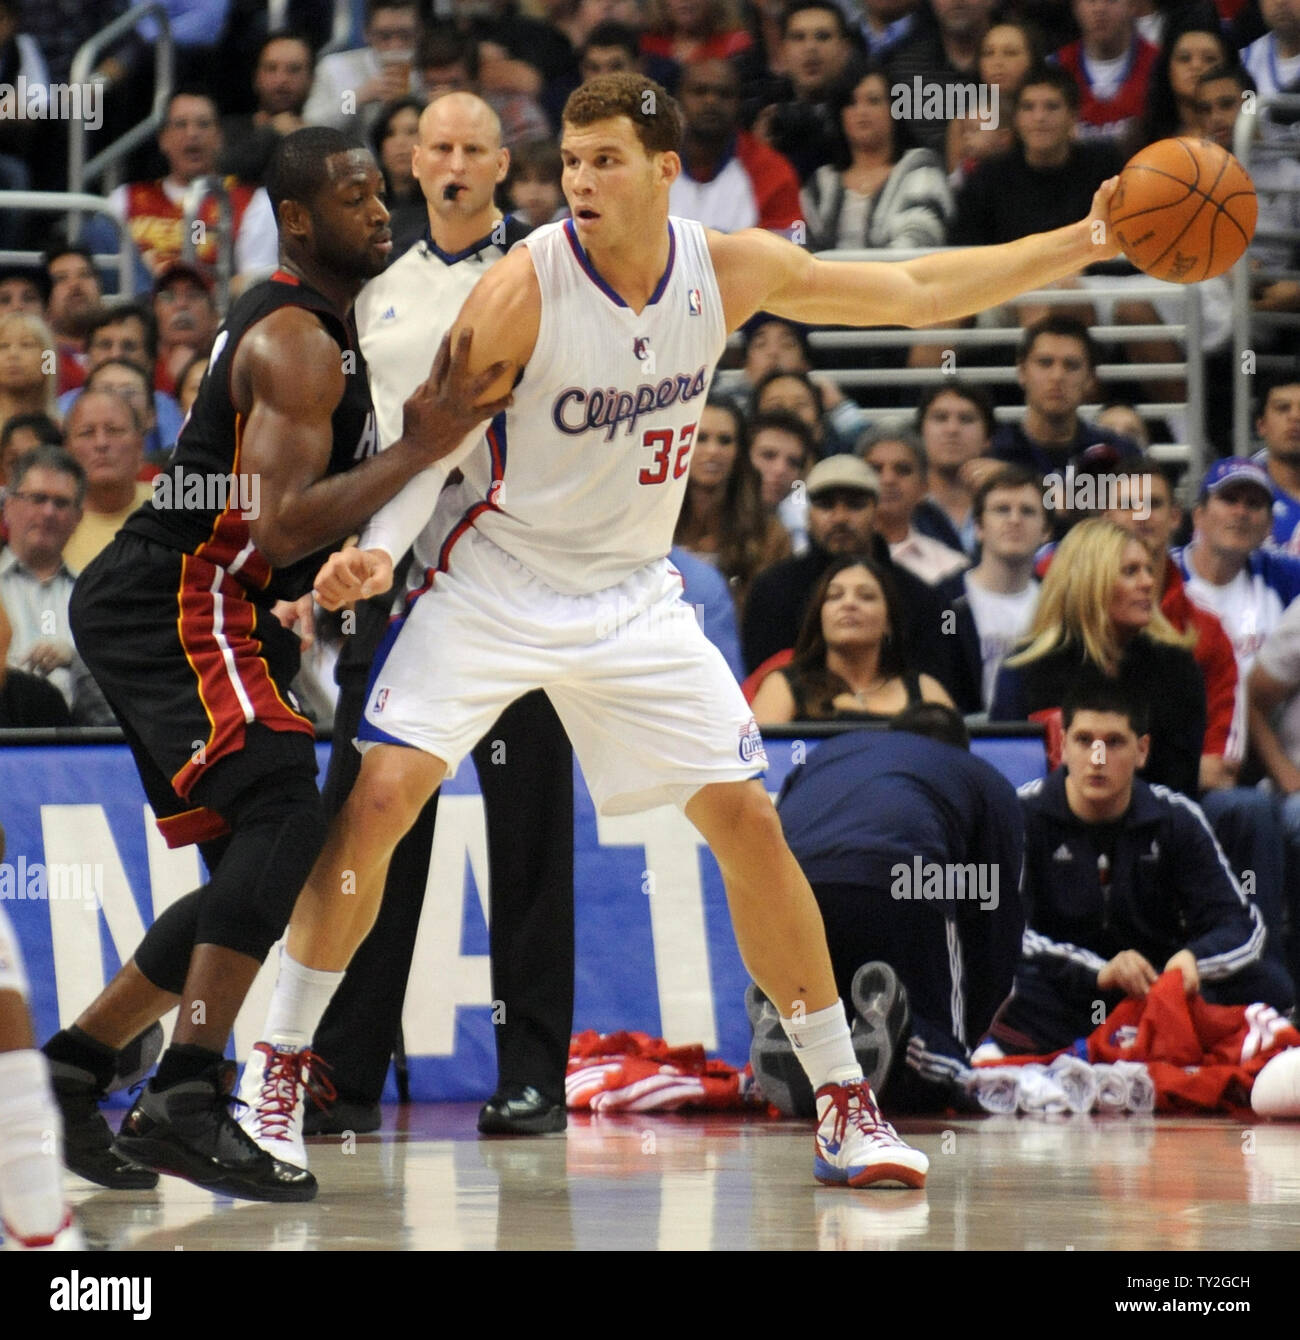 Los Angeles Clippers power forward Blake Griffin (32) keeps the ball away from Miami Heat shooting guard Dwyane Wade (3) in the first half of  their NBA basketball game in Los Angeles on January 11, 2012.    UPI/Lori Shepler Stock Photo